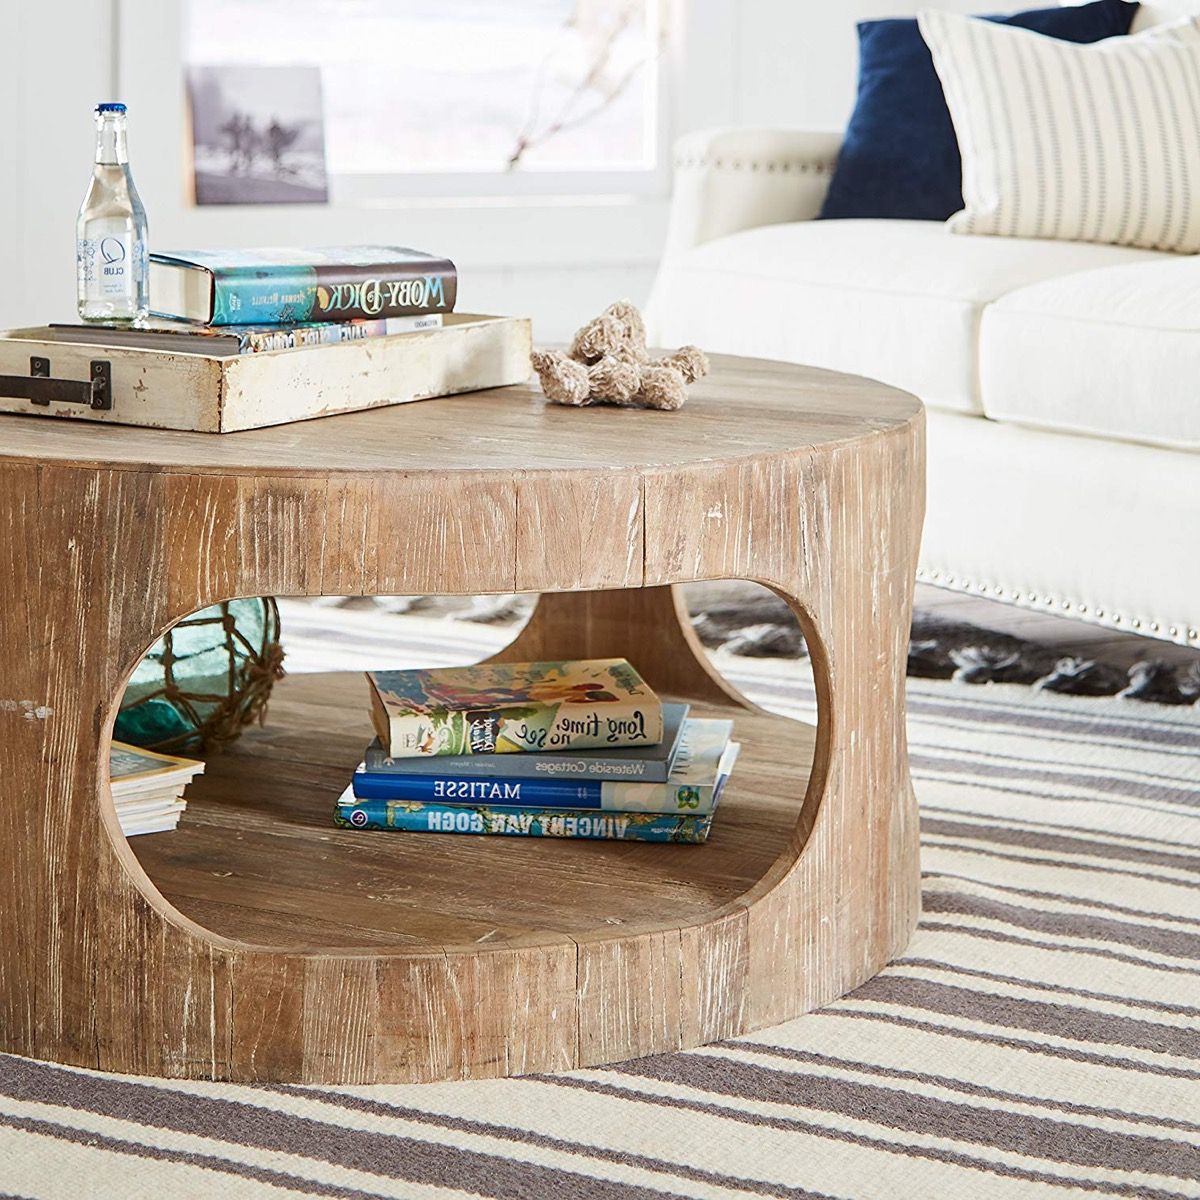 2019 Rustic Round Distressed Wood Coffee Table With Bottom Throughout 3 Piece Shelf Coffee Tables (View 16 of 20)